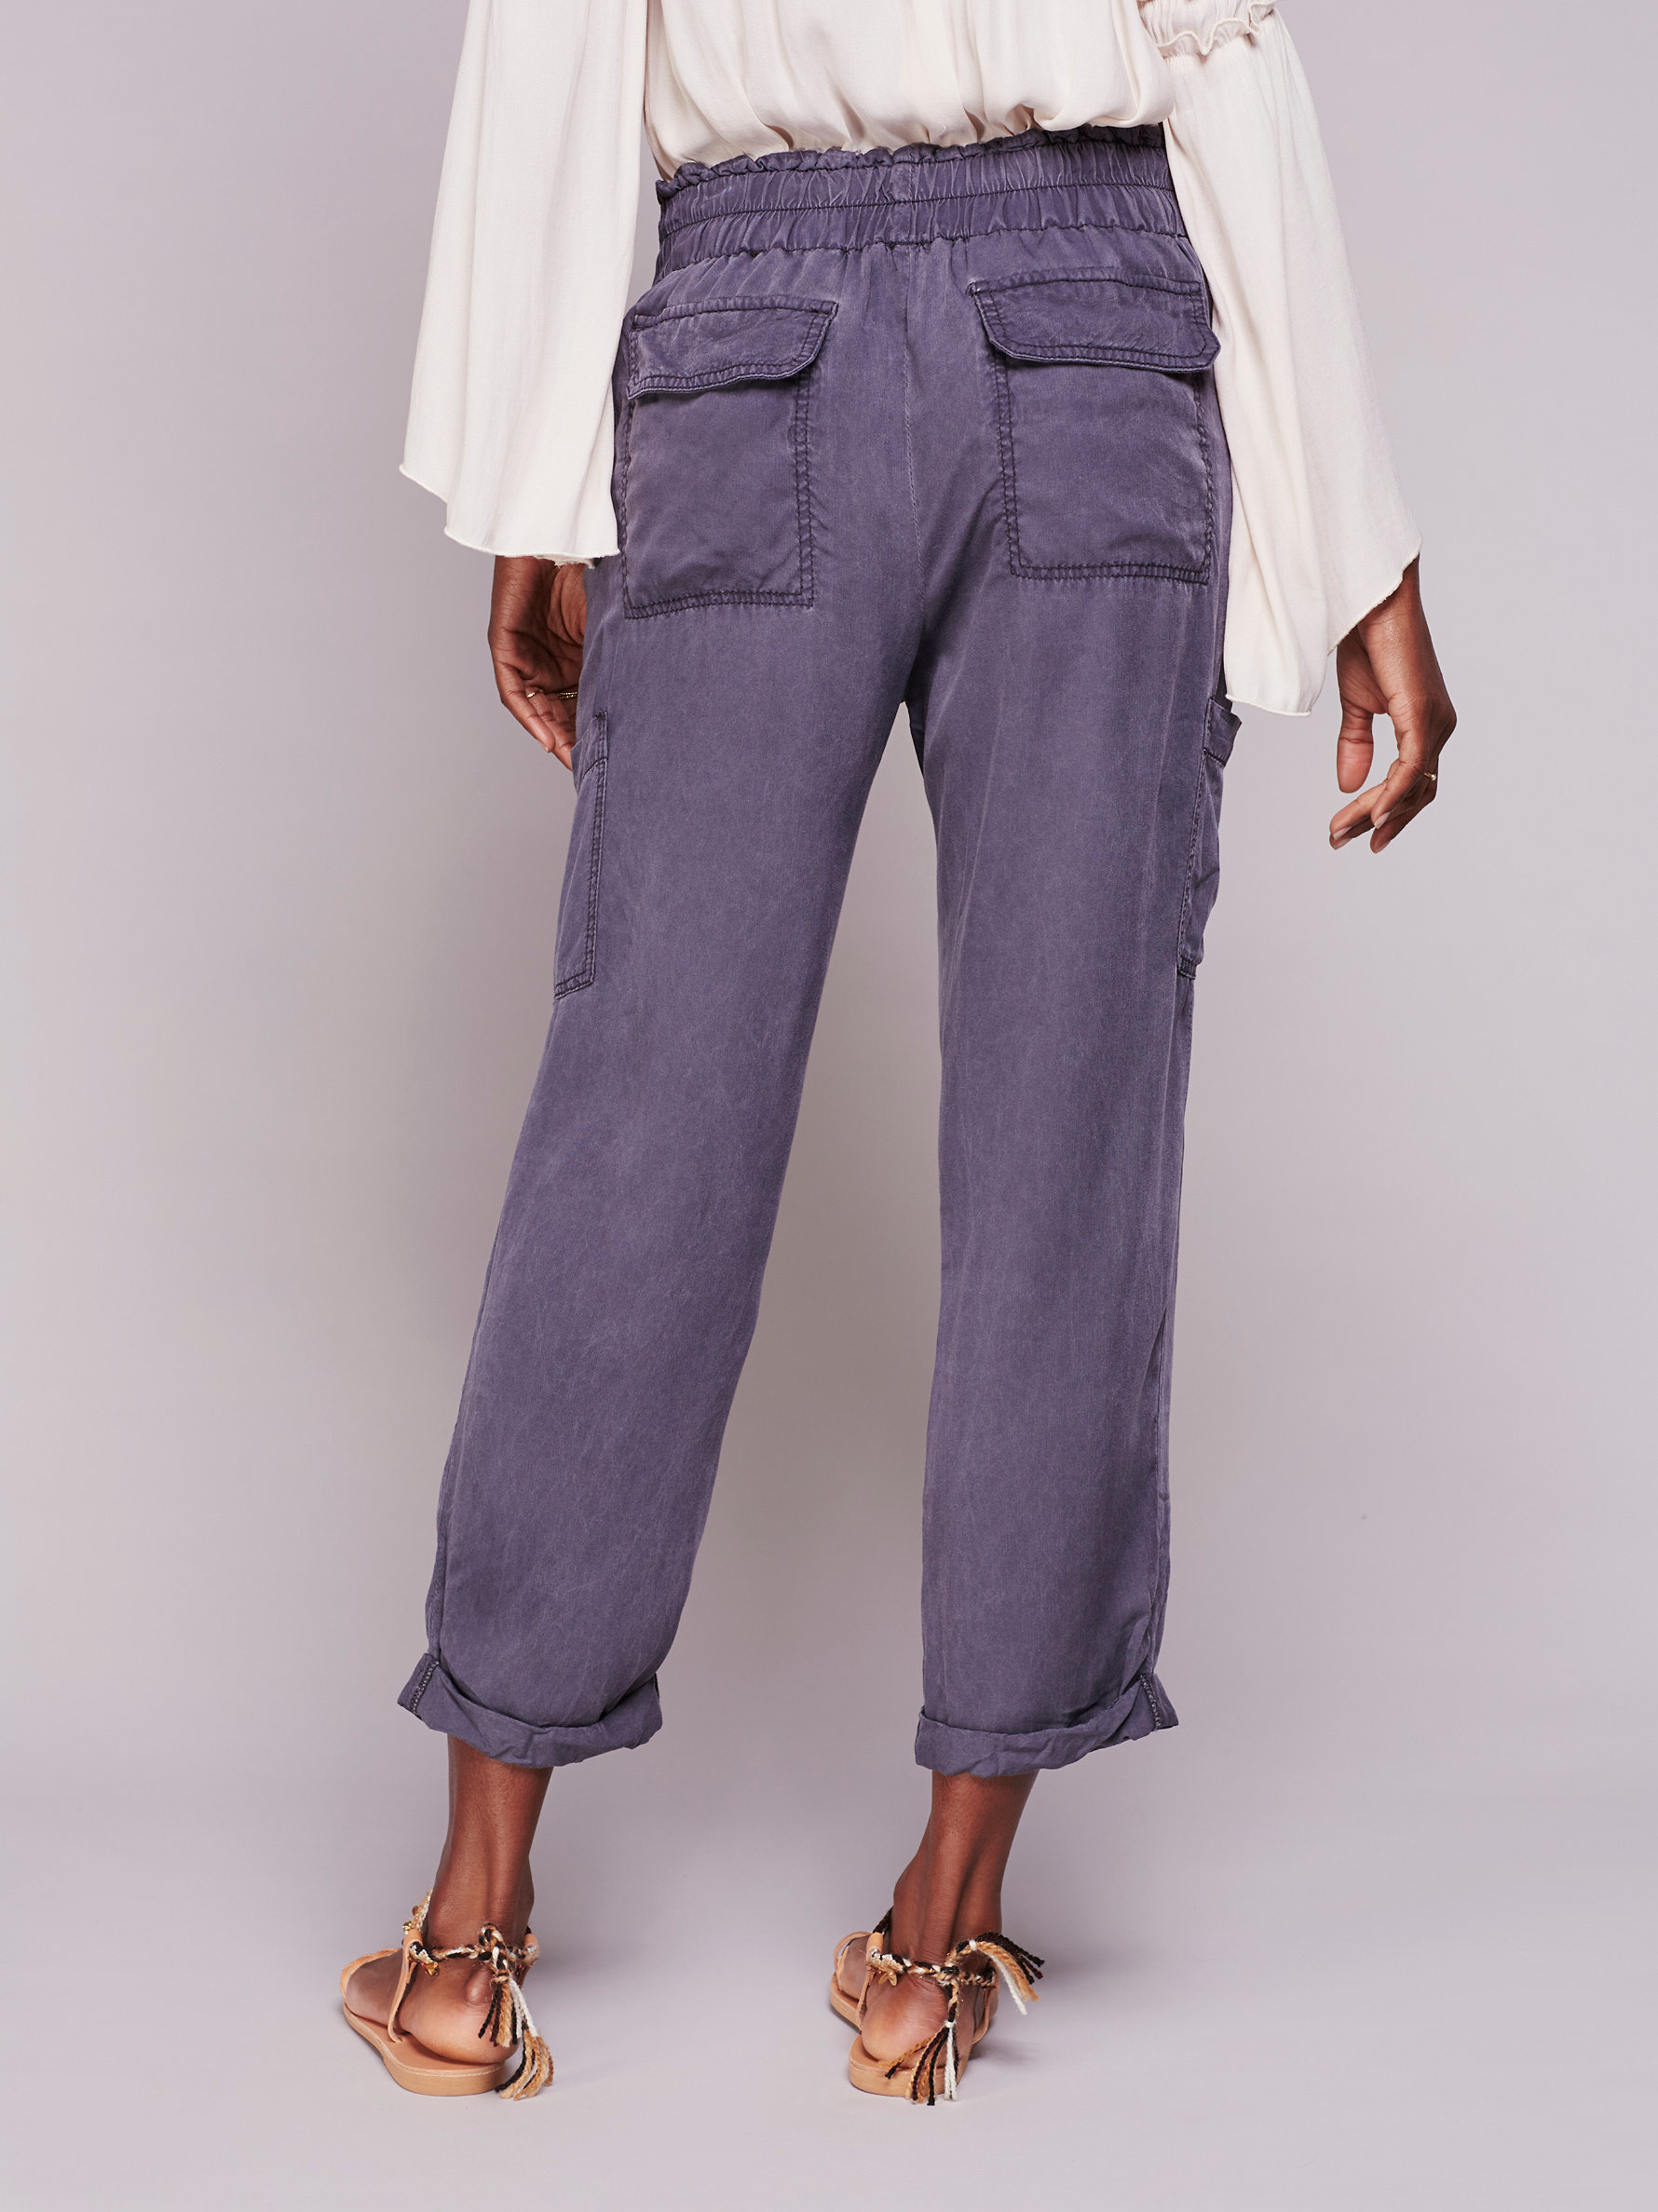 Lyst - Free People Summer's Over Cargo Pants in Purple